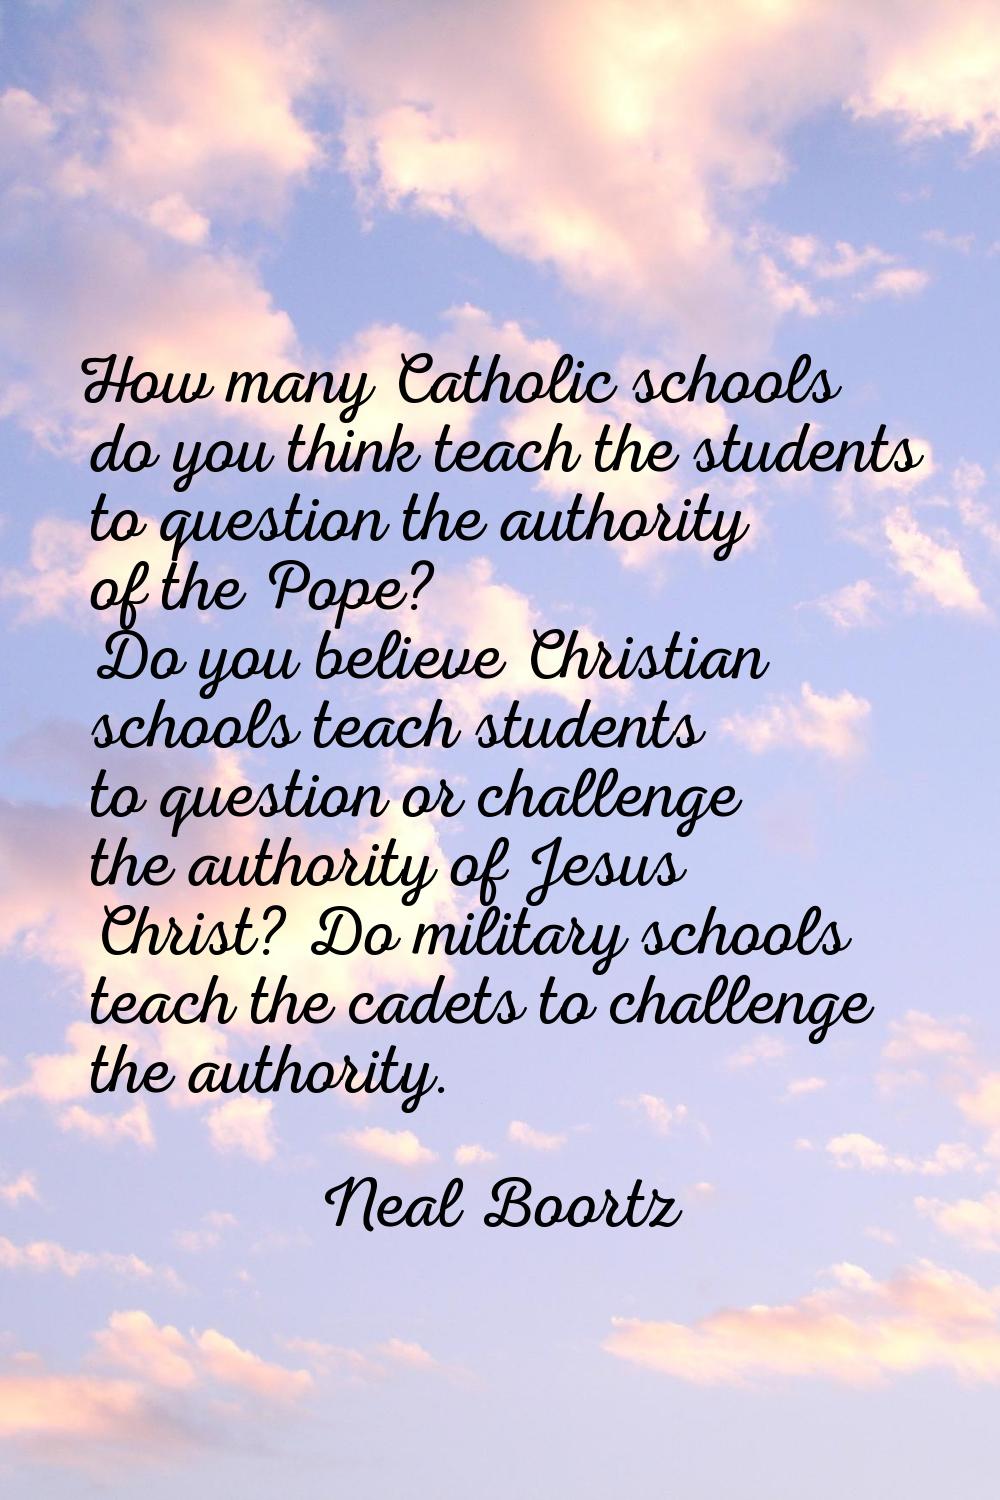 How many Catholic schools do you think teach the students to question the authority of the Pope? Do